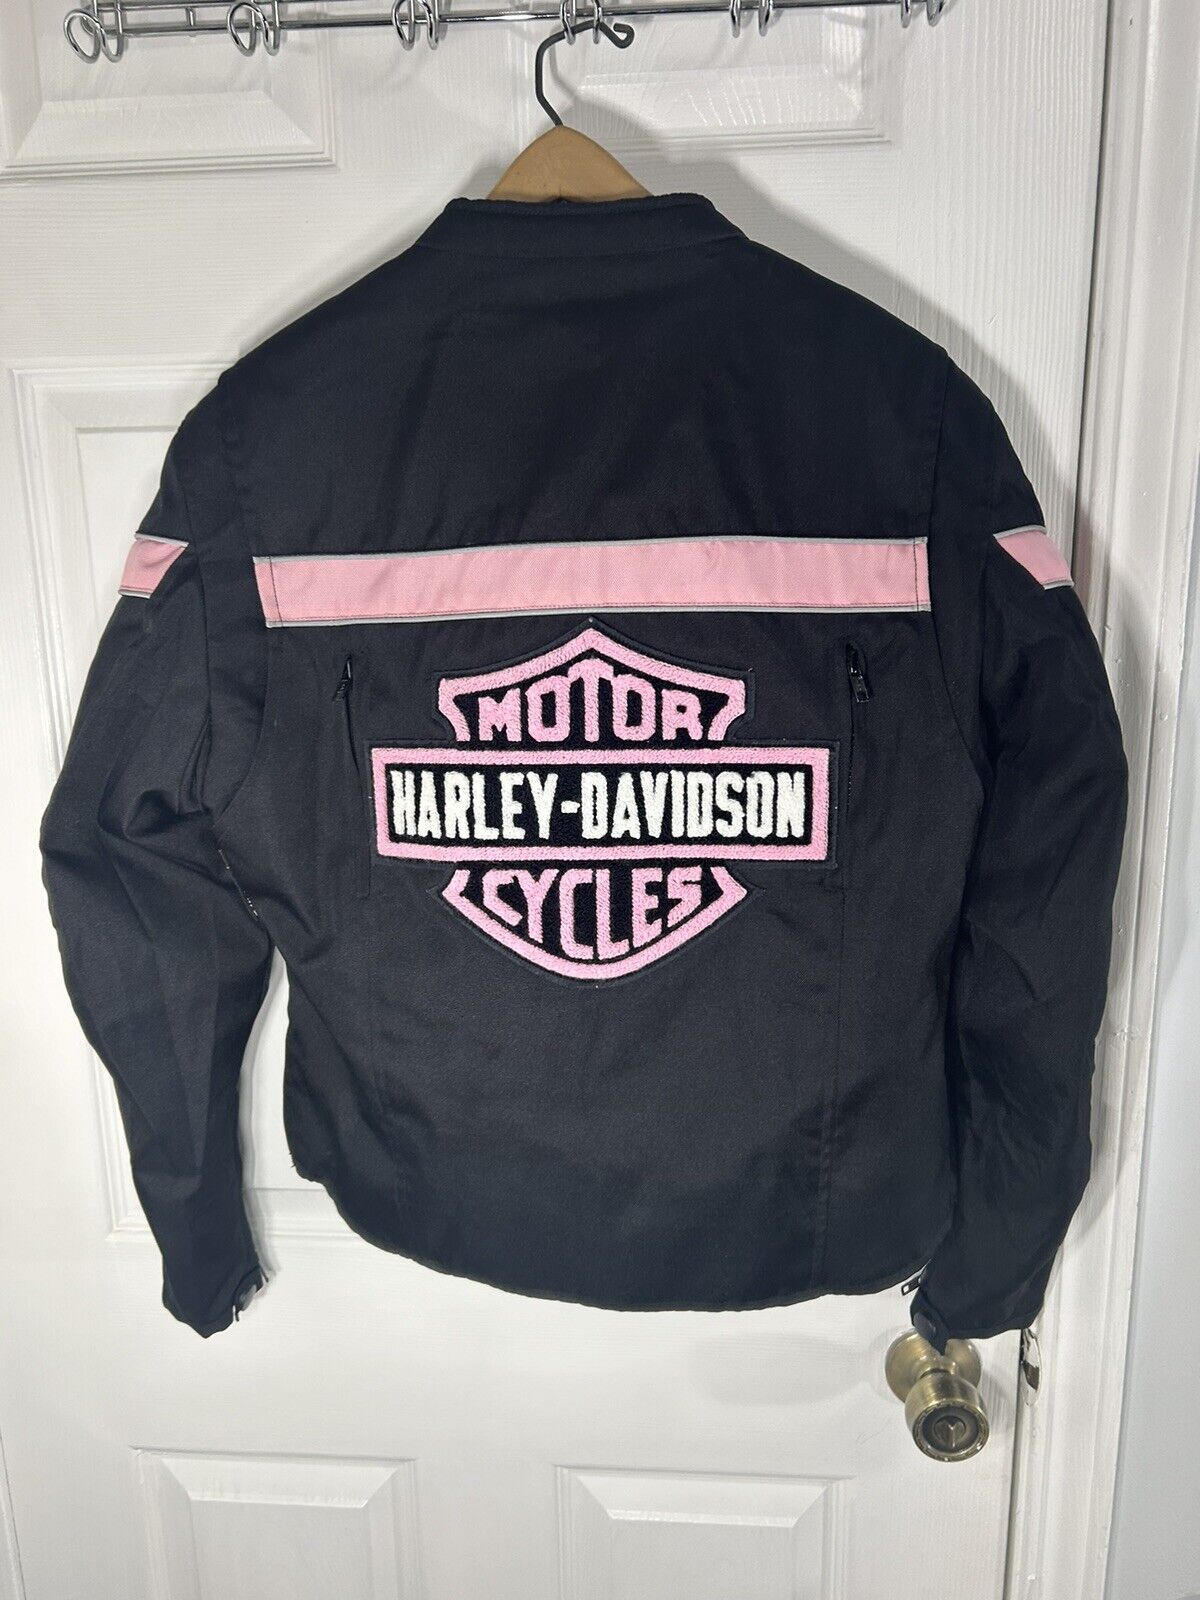 Woman’s  Harley Davidson Motorcycle Riding Jacket Pink And Black Size S